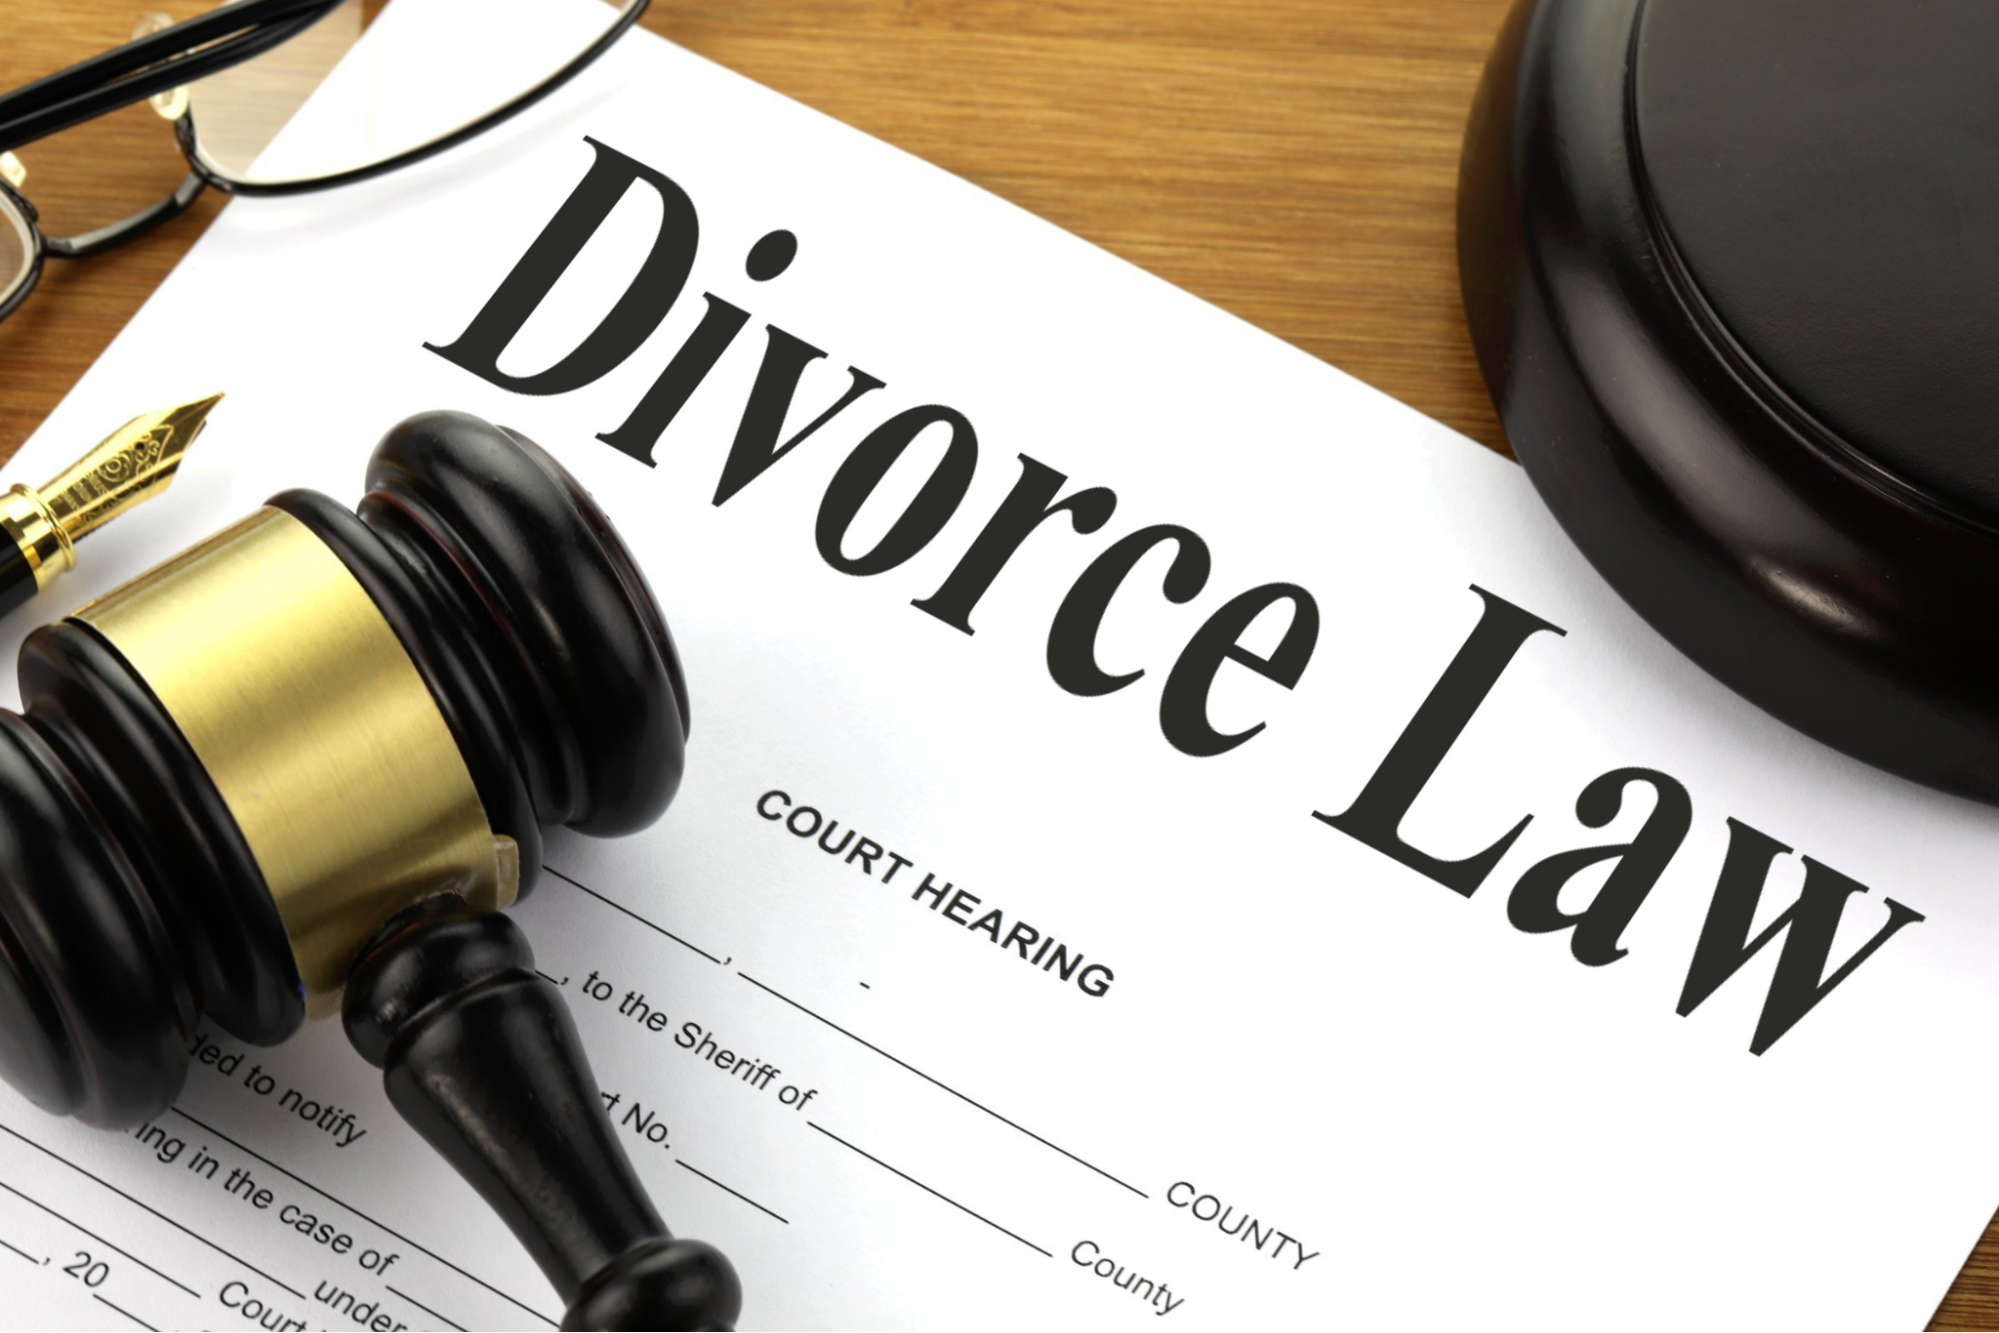 A divorce law document with a gavel on top and the possibility of emptying a personal bank account before divorce.